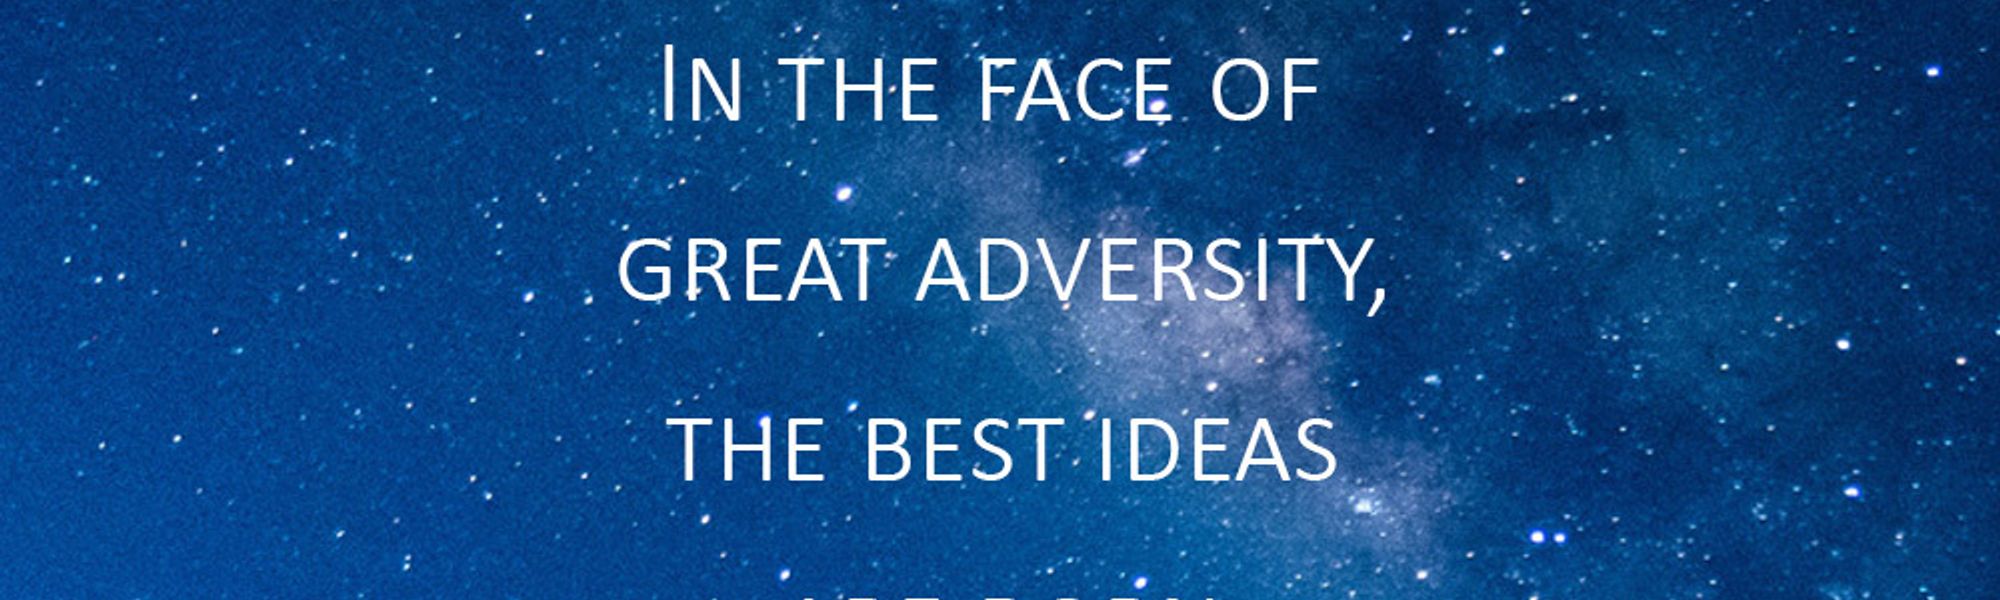 In The Face Of Great Adversity, The Best Ideas Are Born